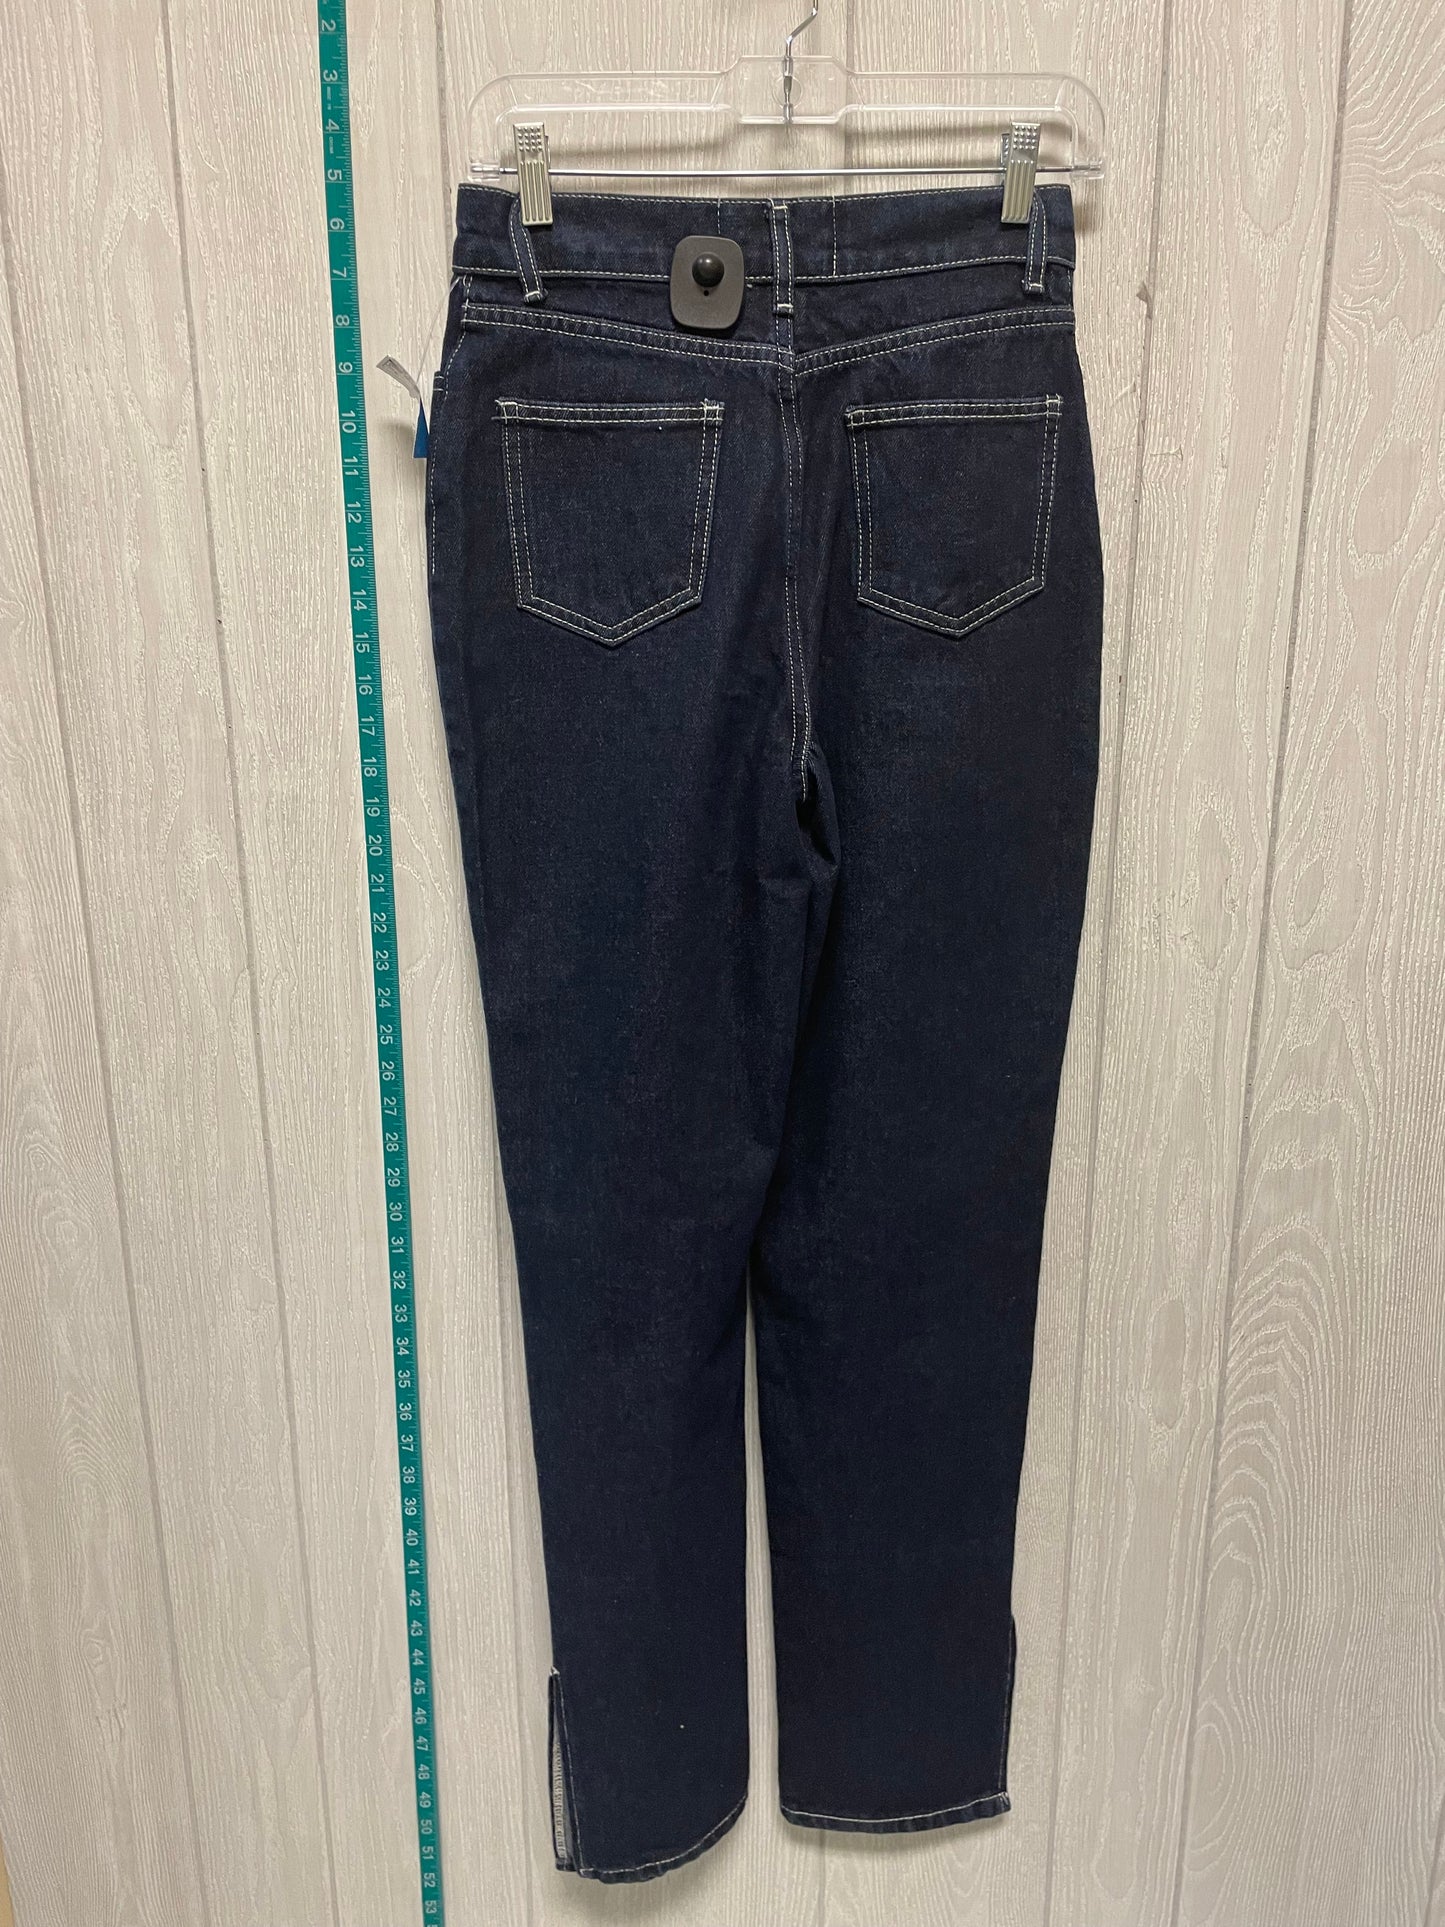 Jeans Relaxed/boyfriend By Boohoo Boutique  Size: 2